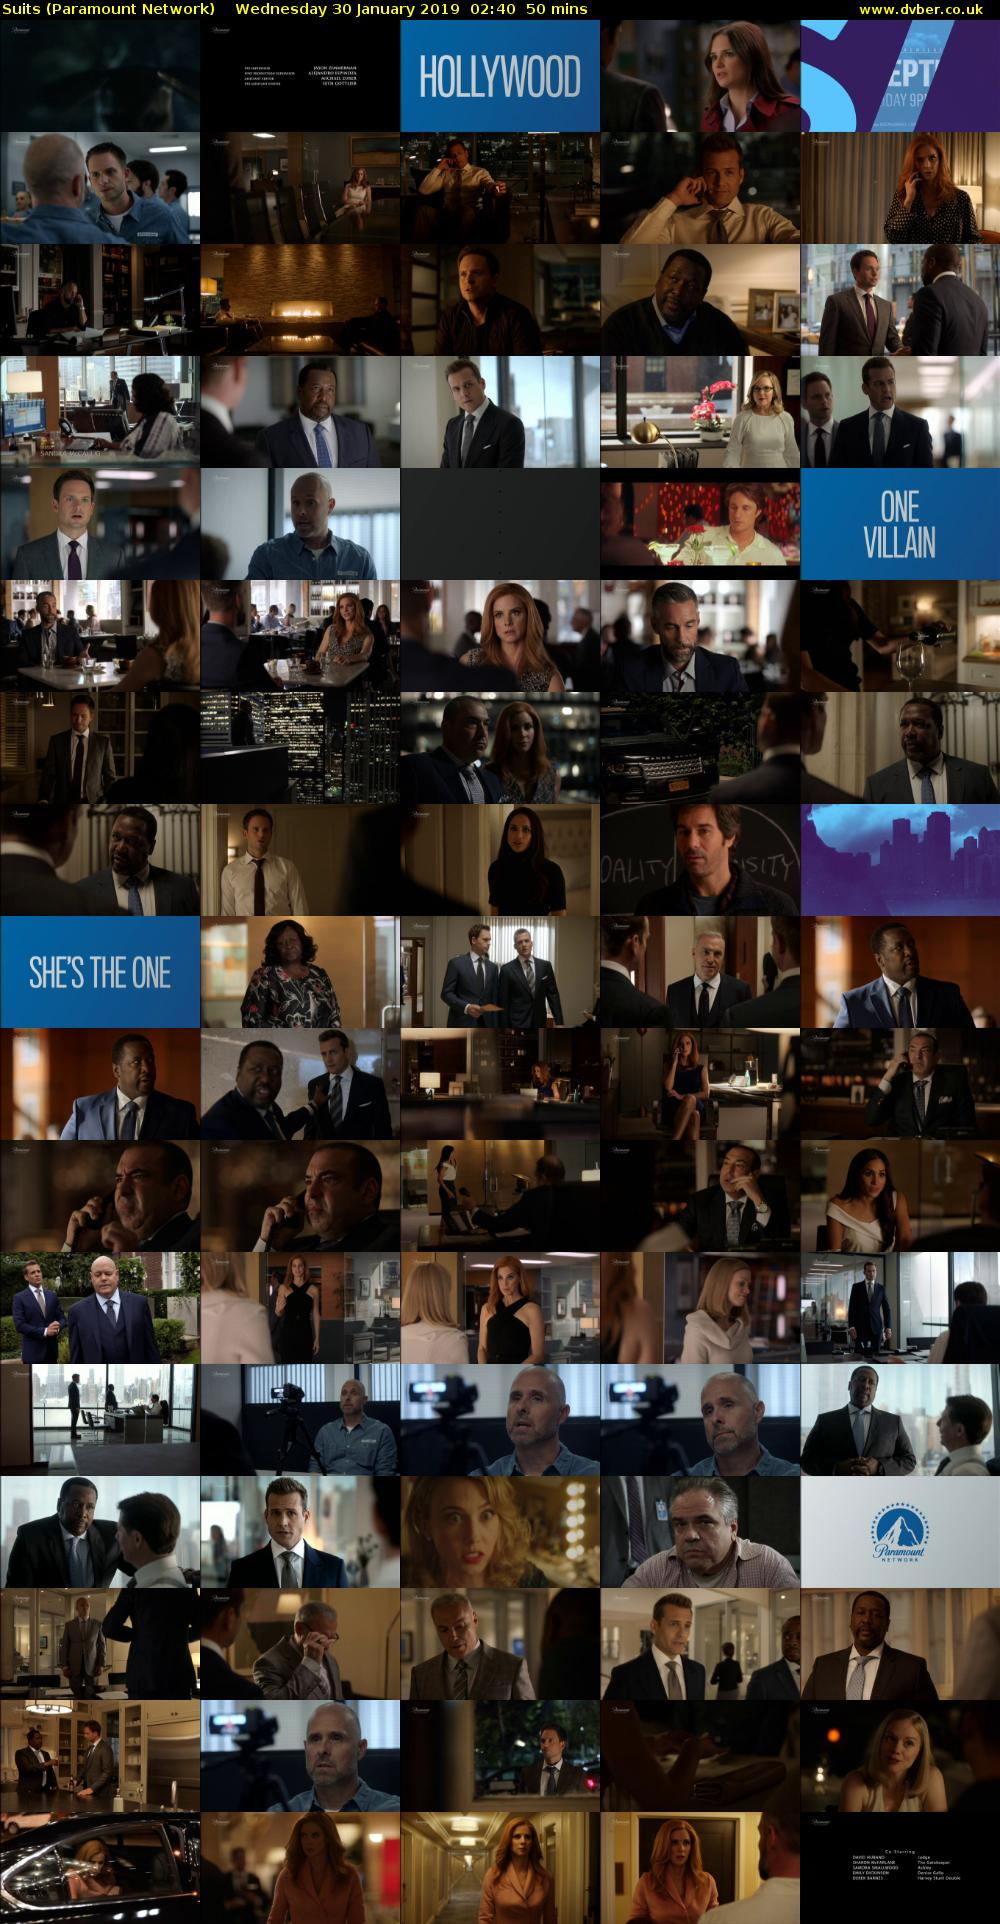 Suits (Paramount Network) Wednesday 30 January 2019 02:40 - 03:30